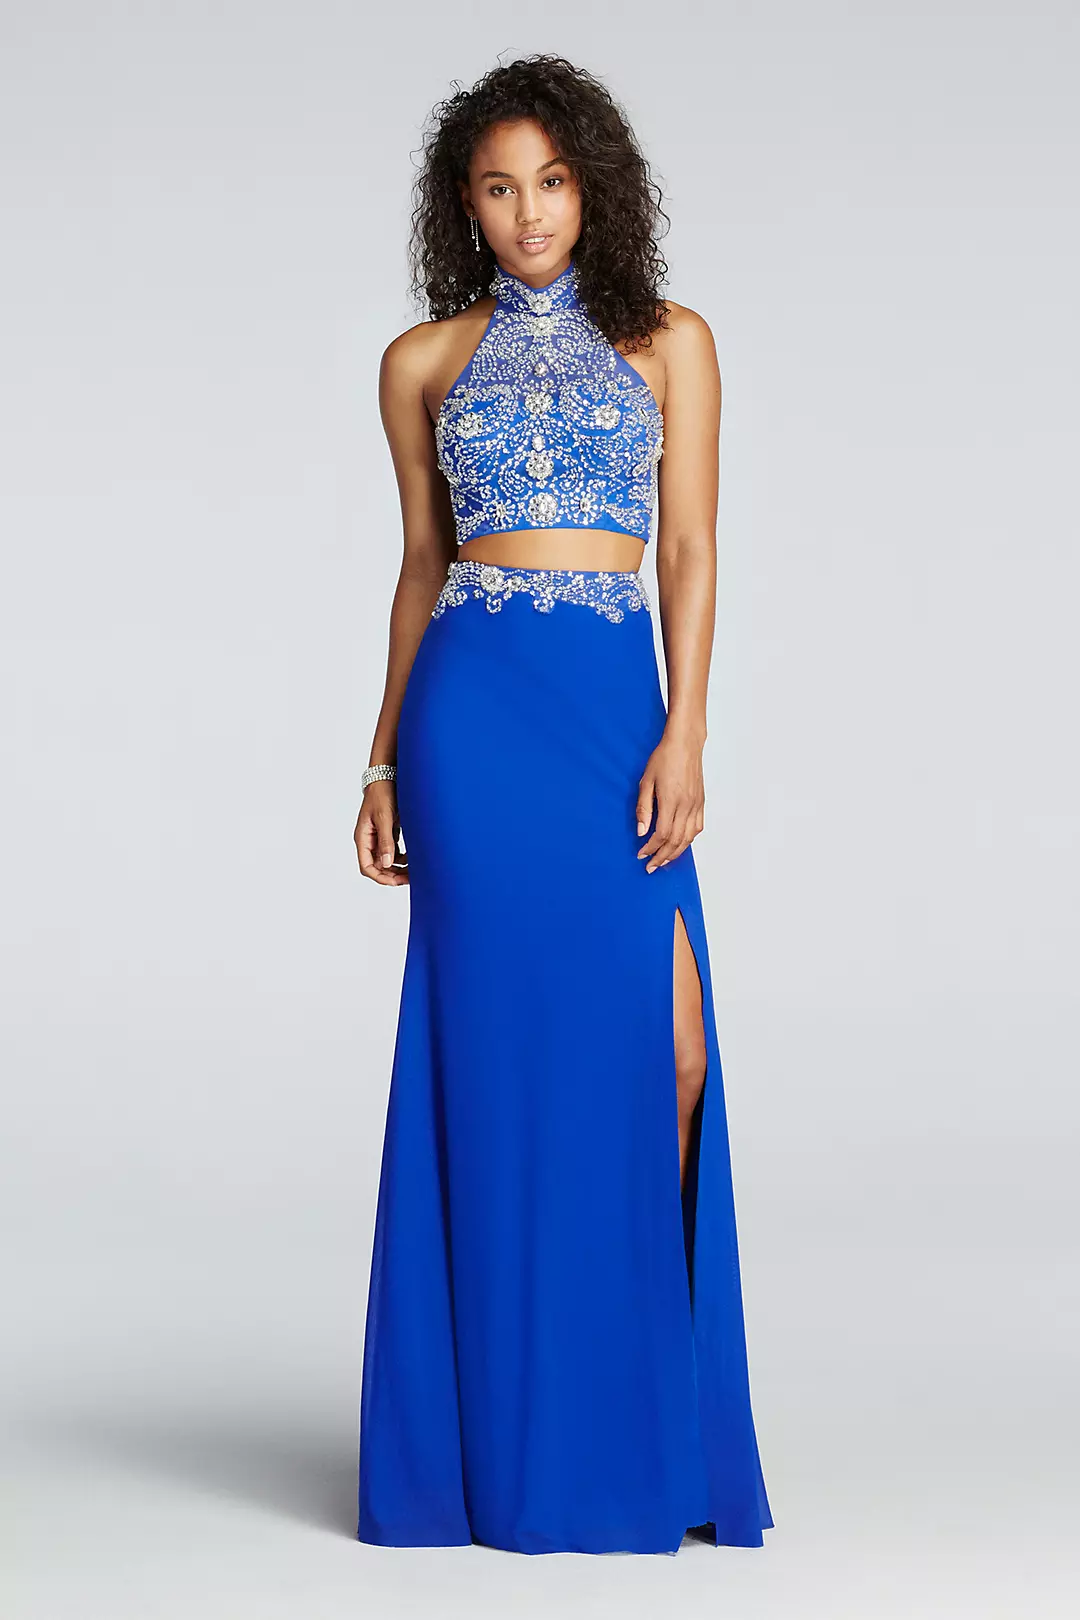 Two Piece Crystal Halter Prom Crop Top with Skirt Image